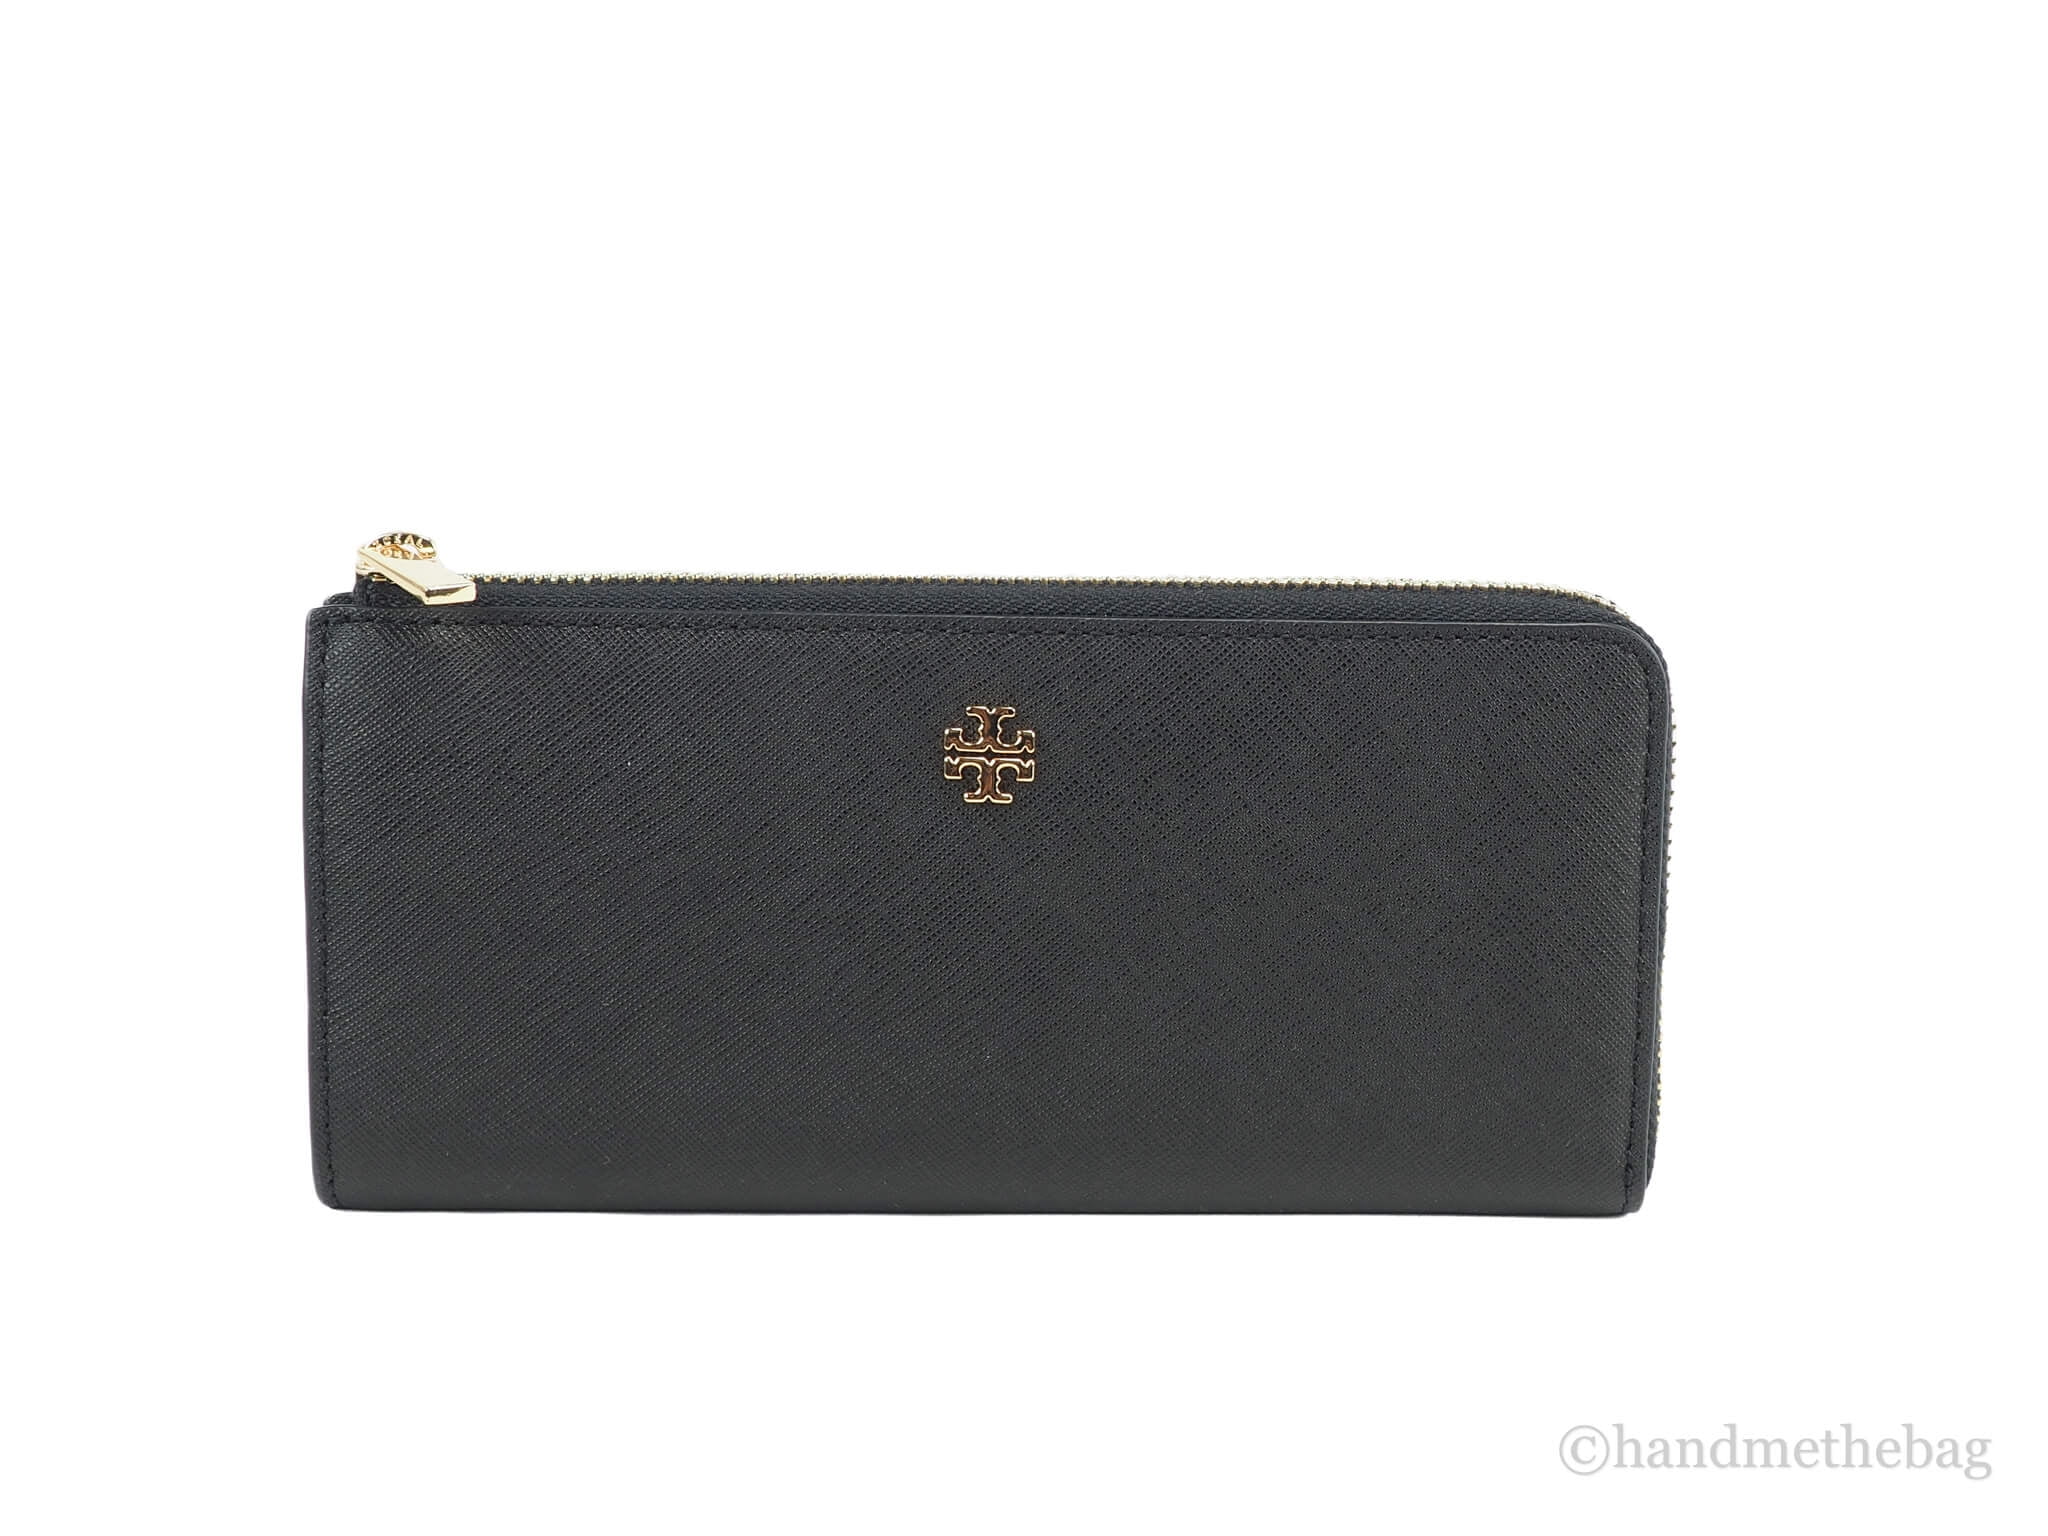 Tory Burch (86078) Emerson Black Saffiano Leather L- Zip Continental Wallet